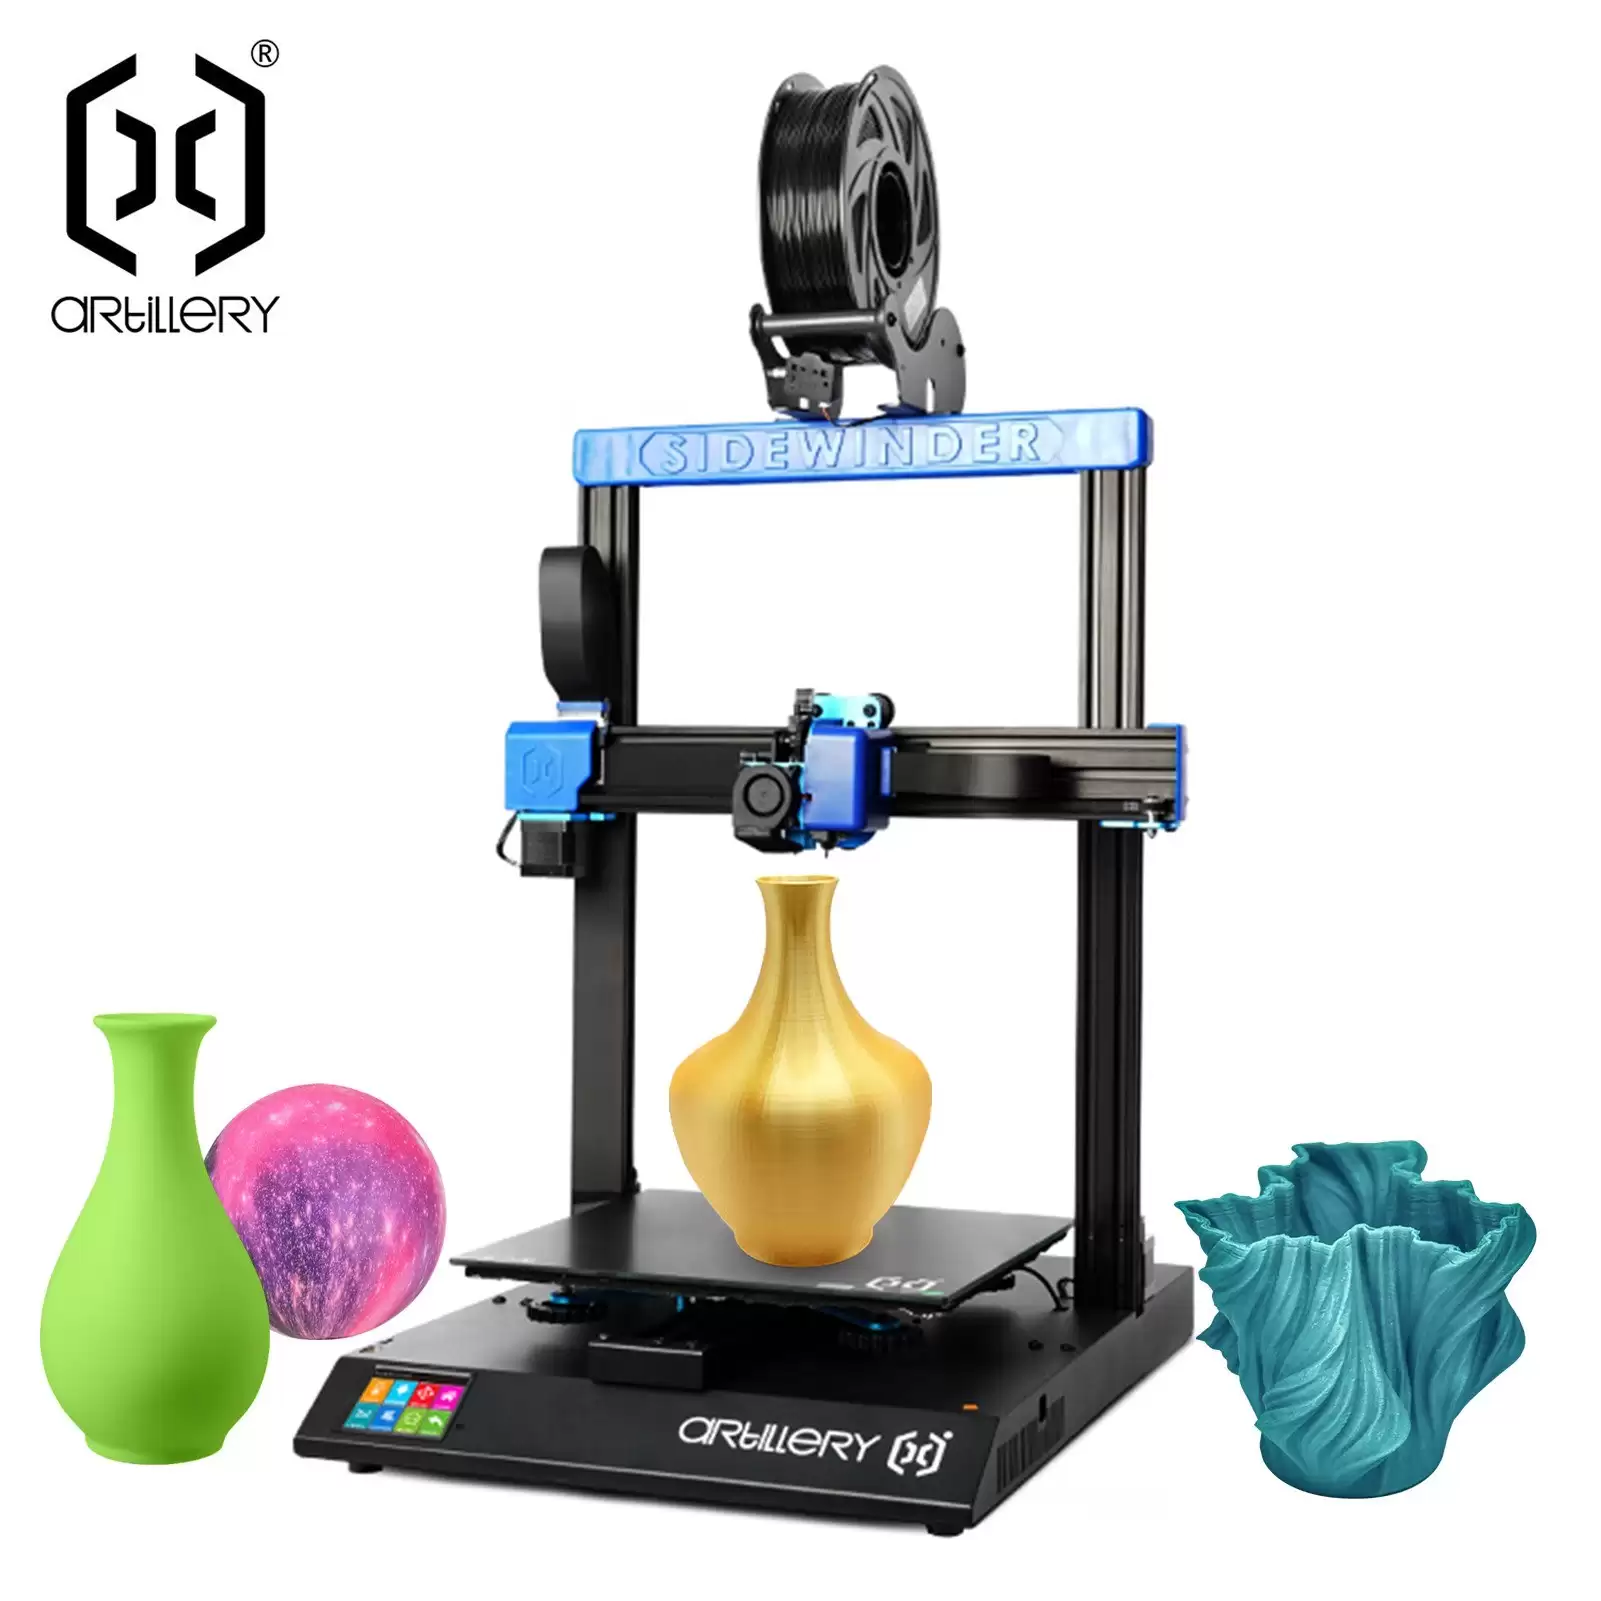 Order In Just $249.99 Artillery Sidewinder-X2 3d Printer ,Free Shipping With This Cafago Discount Voucher